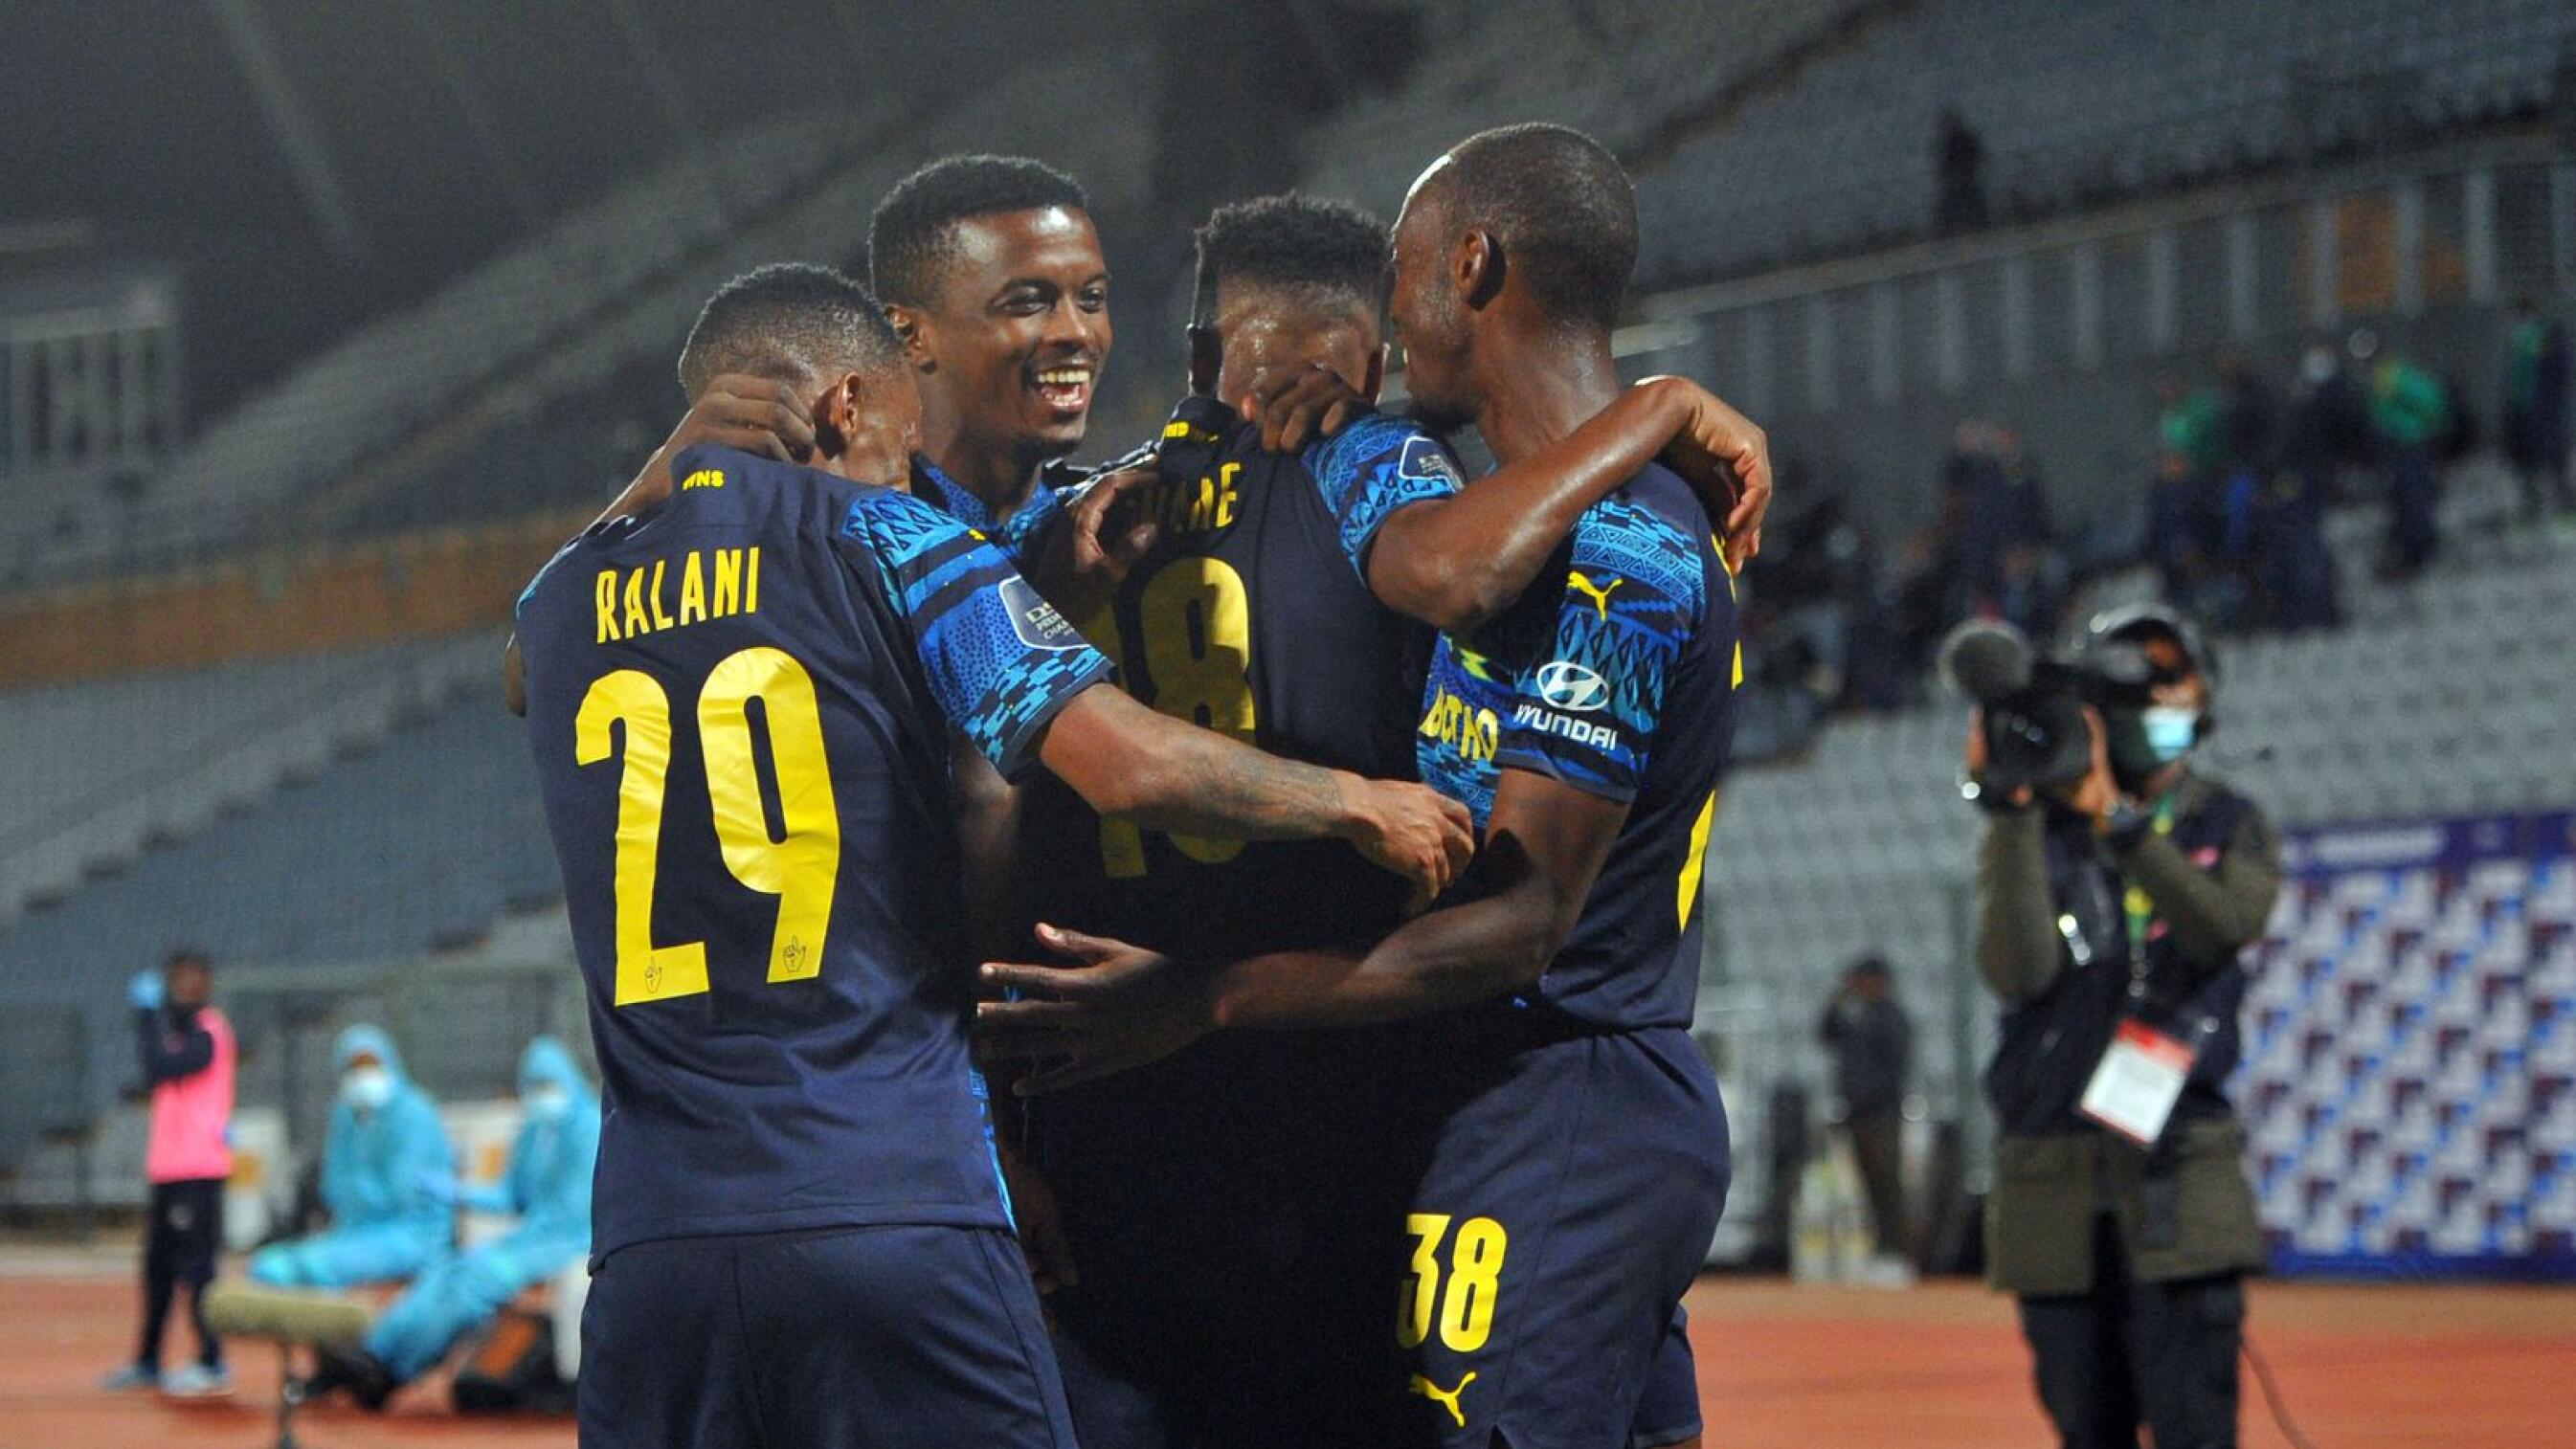 Mamelodi Sundowns’ Peter Shalulile celebrates with teammates after scoring one of their goals during their DStv Premiership match against Swallows FC at Dobsonville Stadium in Soweto on Wednesday